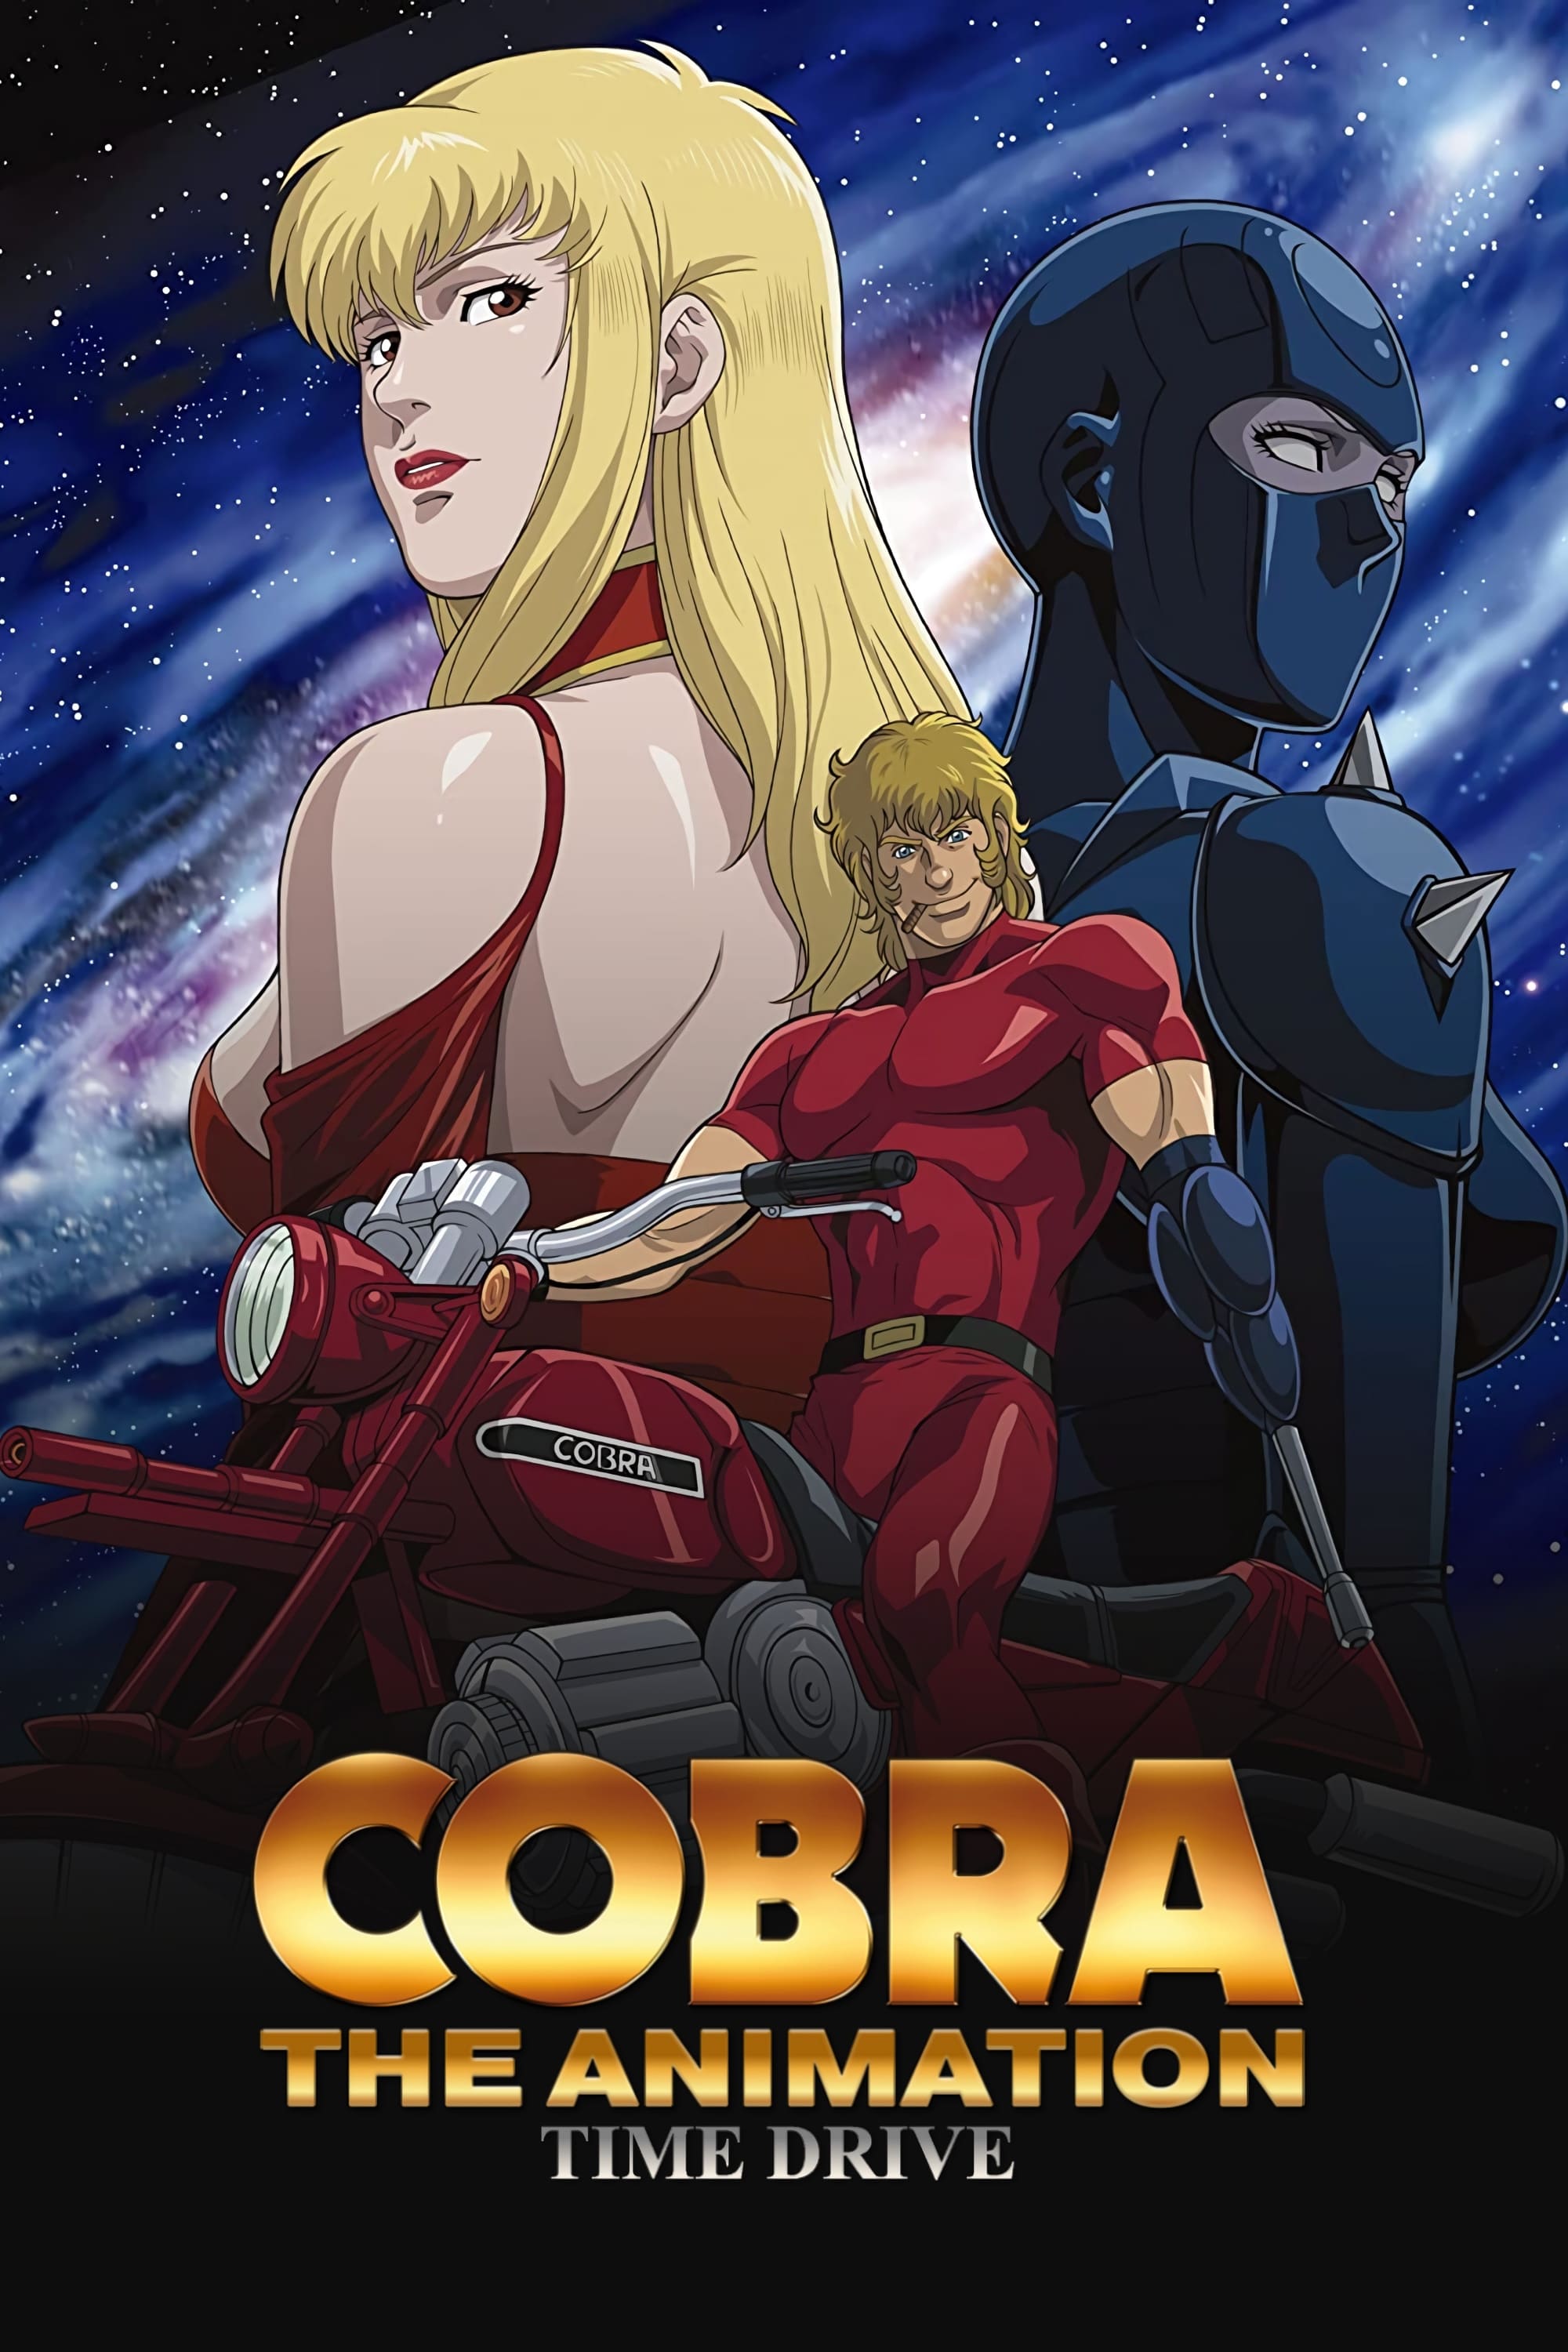 Cobra The Animation - Time Drive (2009)